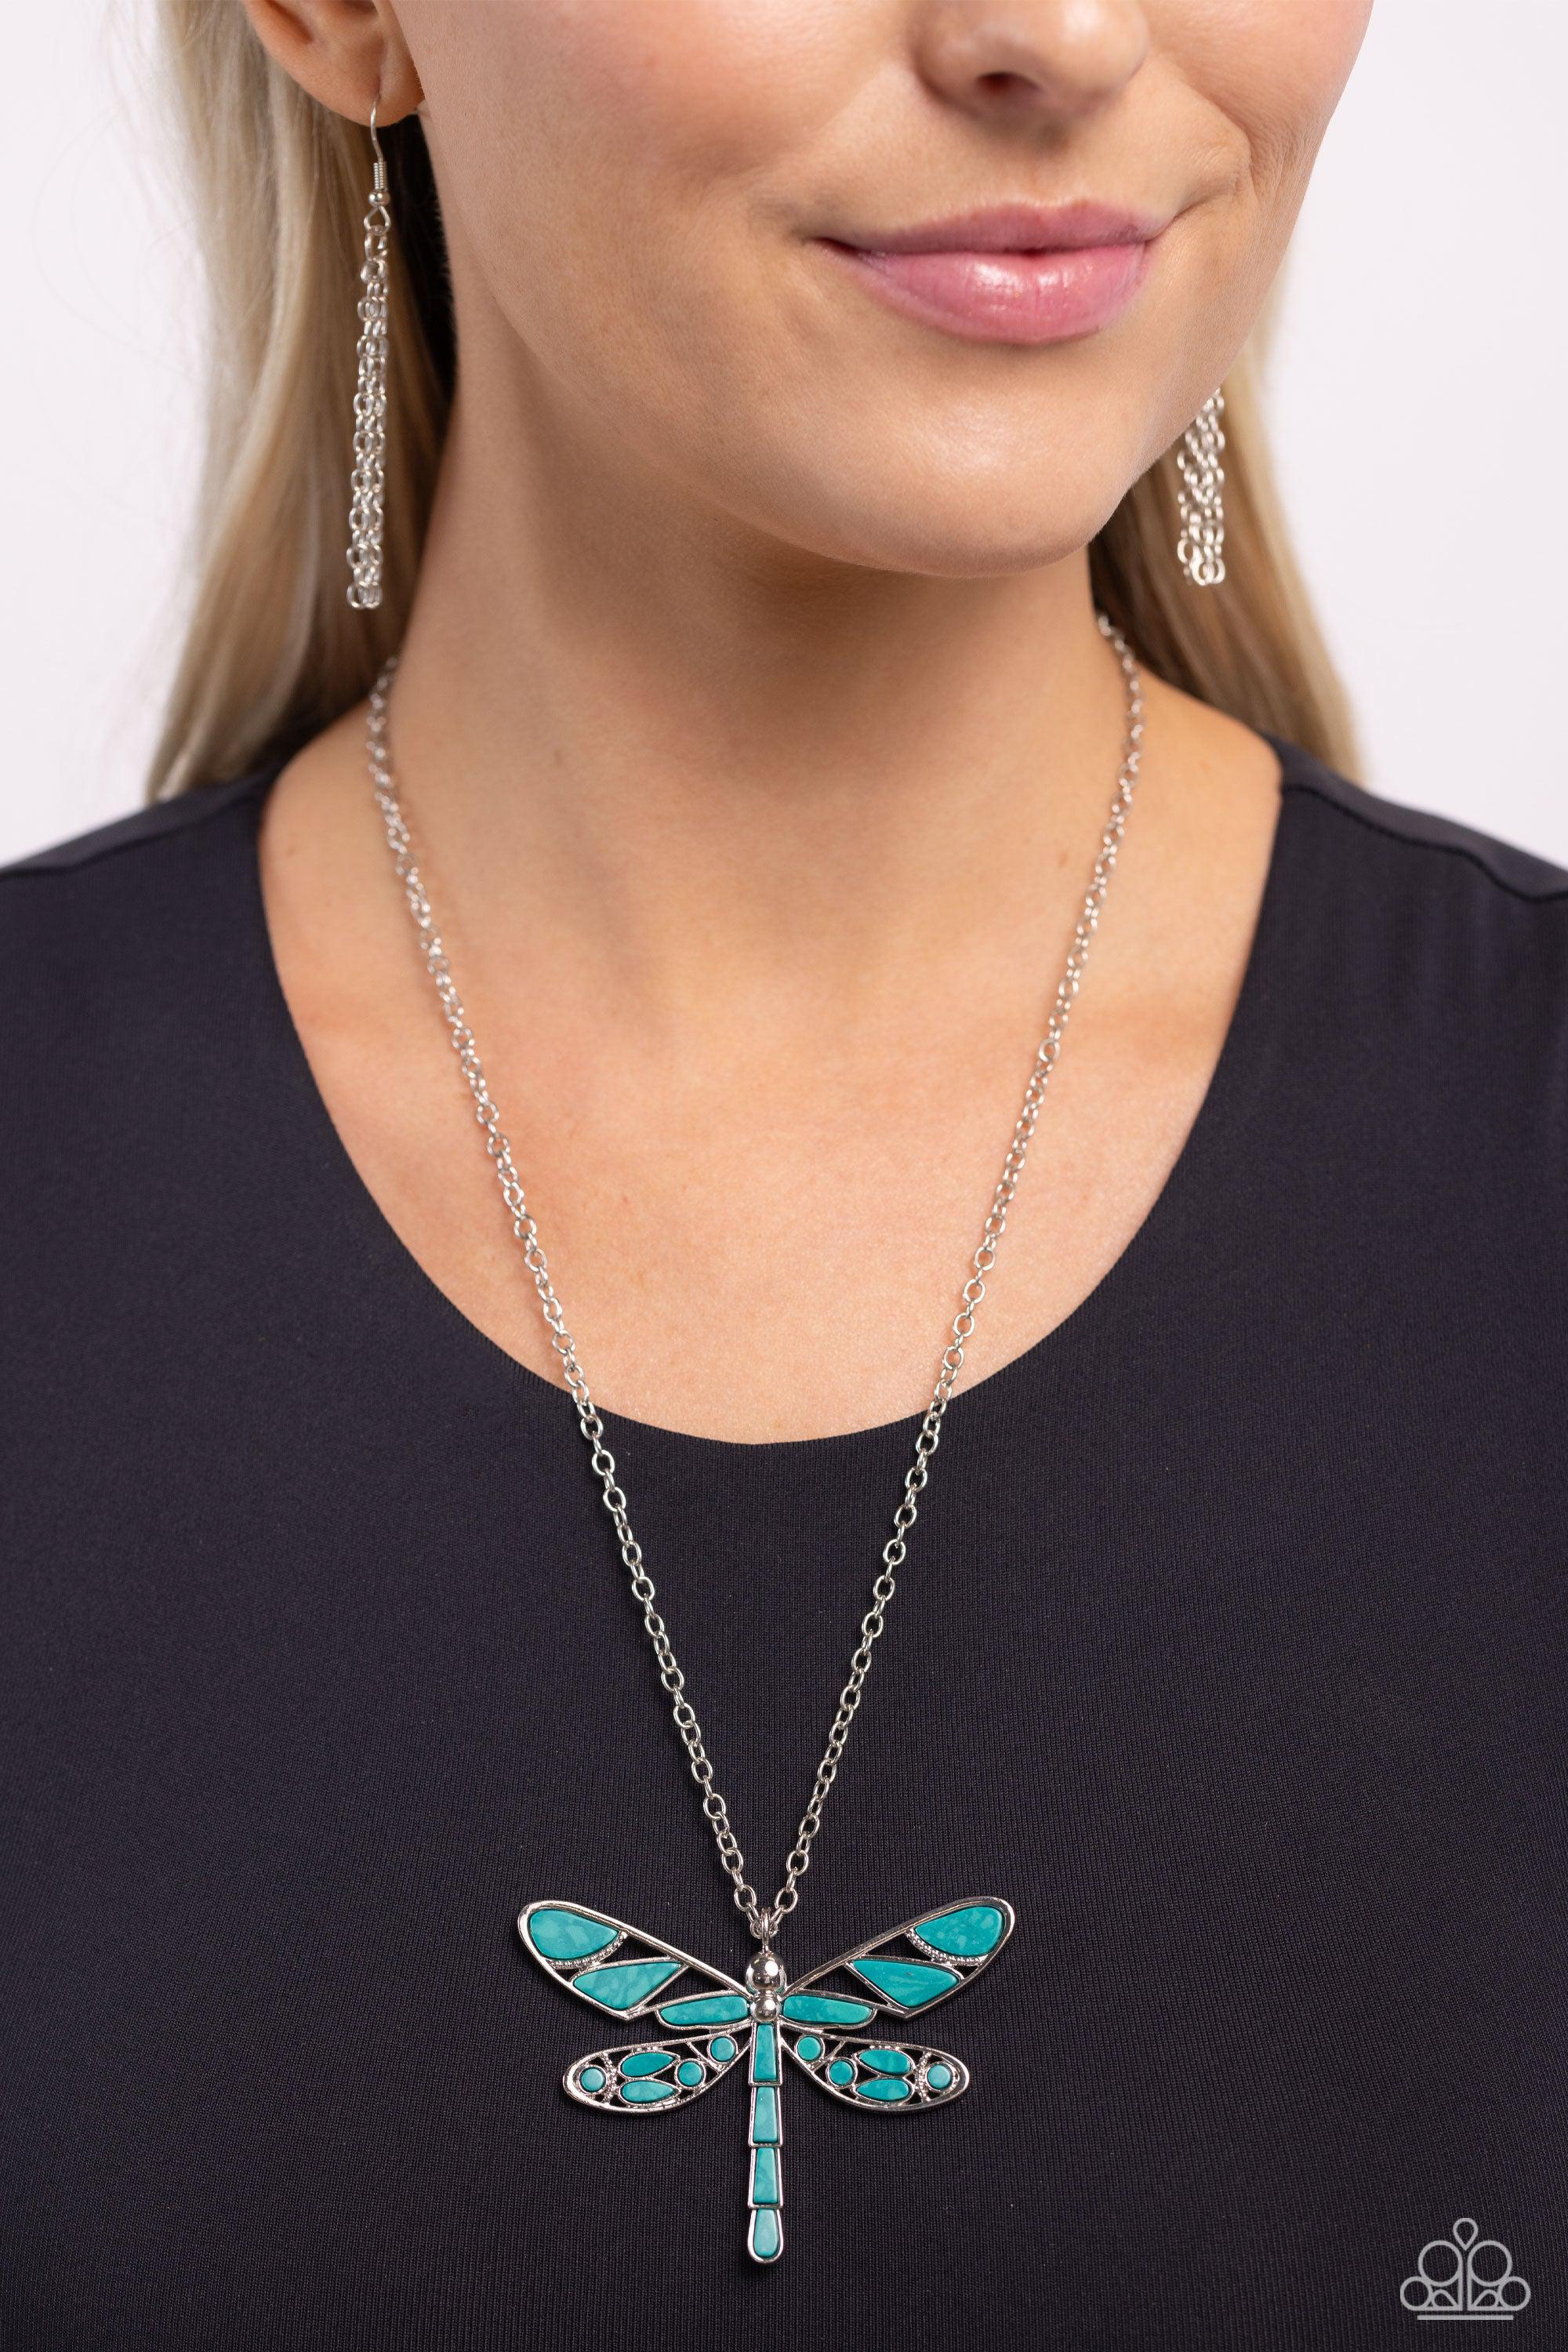 FLYING Low Teal Green Stone Dragonfly Necklace - Paparazzi Accessories- lightbox - CarasShop.com - $5 Jewelry by Cara Jewels